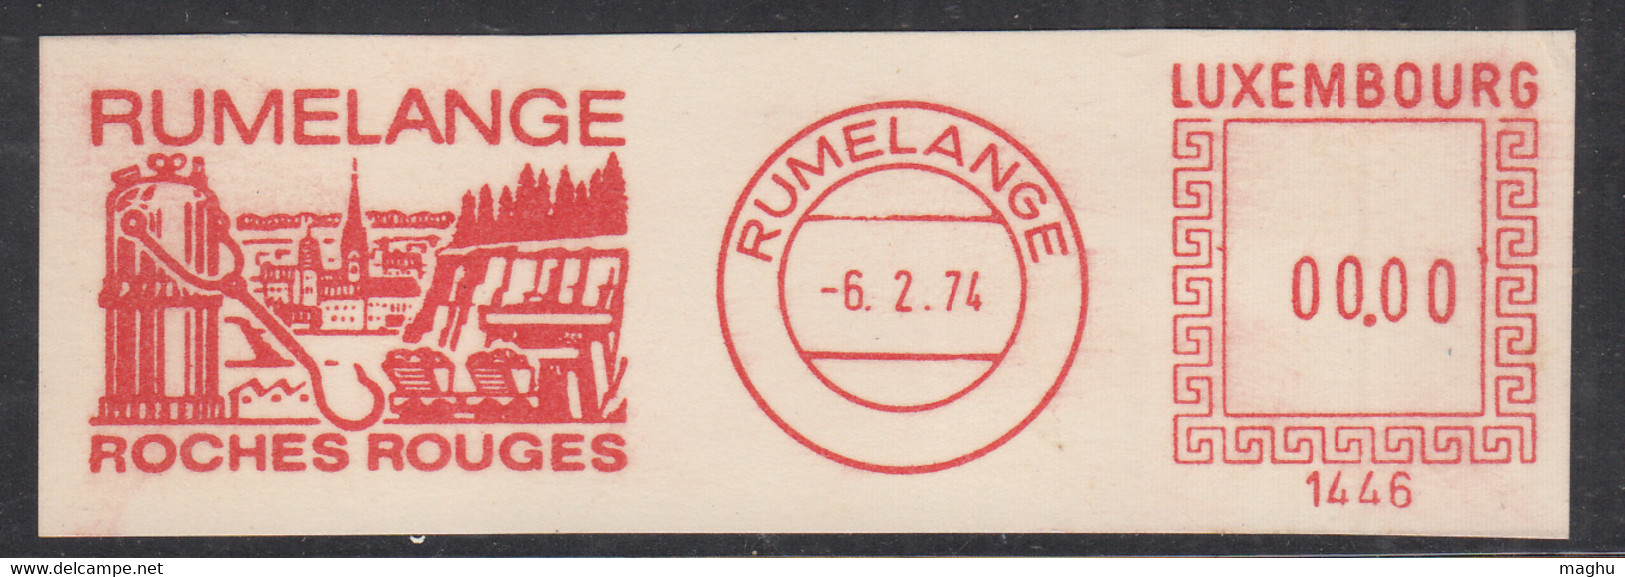 00.00 Value, Trial Meter Cancellation?, ATM Machine Stamp, Luxemburg, Rumelange Rochhes Rouges, Mineral, Mining Tools, - Maschinenstempel (EMA)